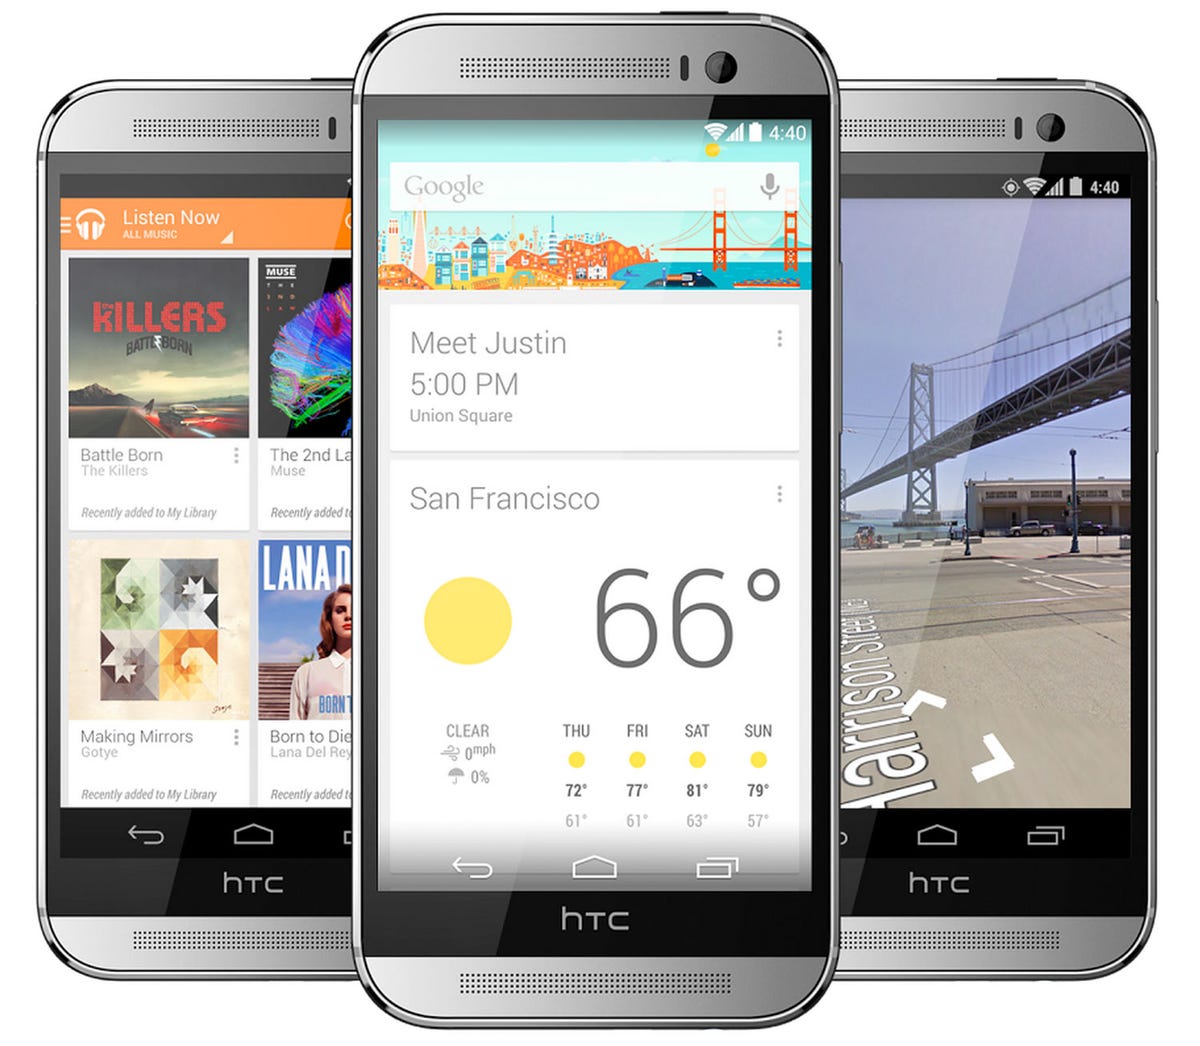 The Google Play edition of the HTC One M8